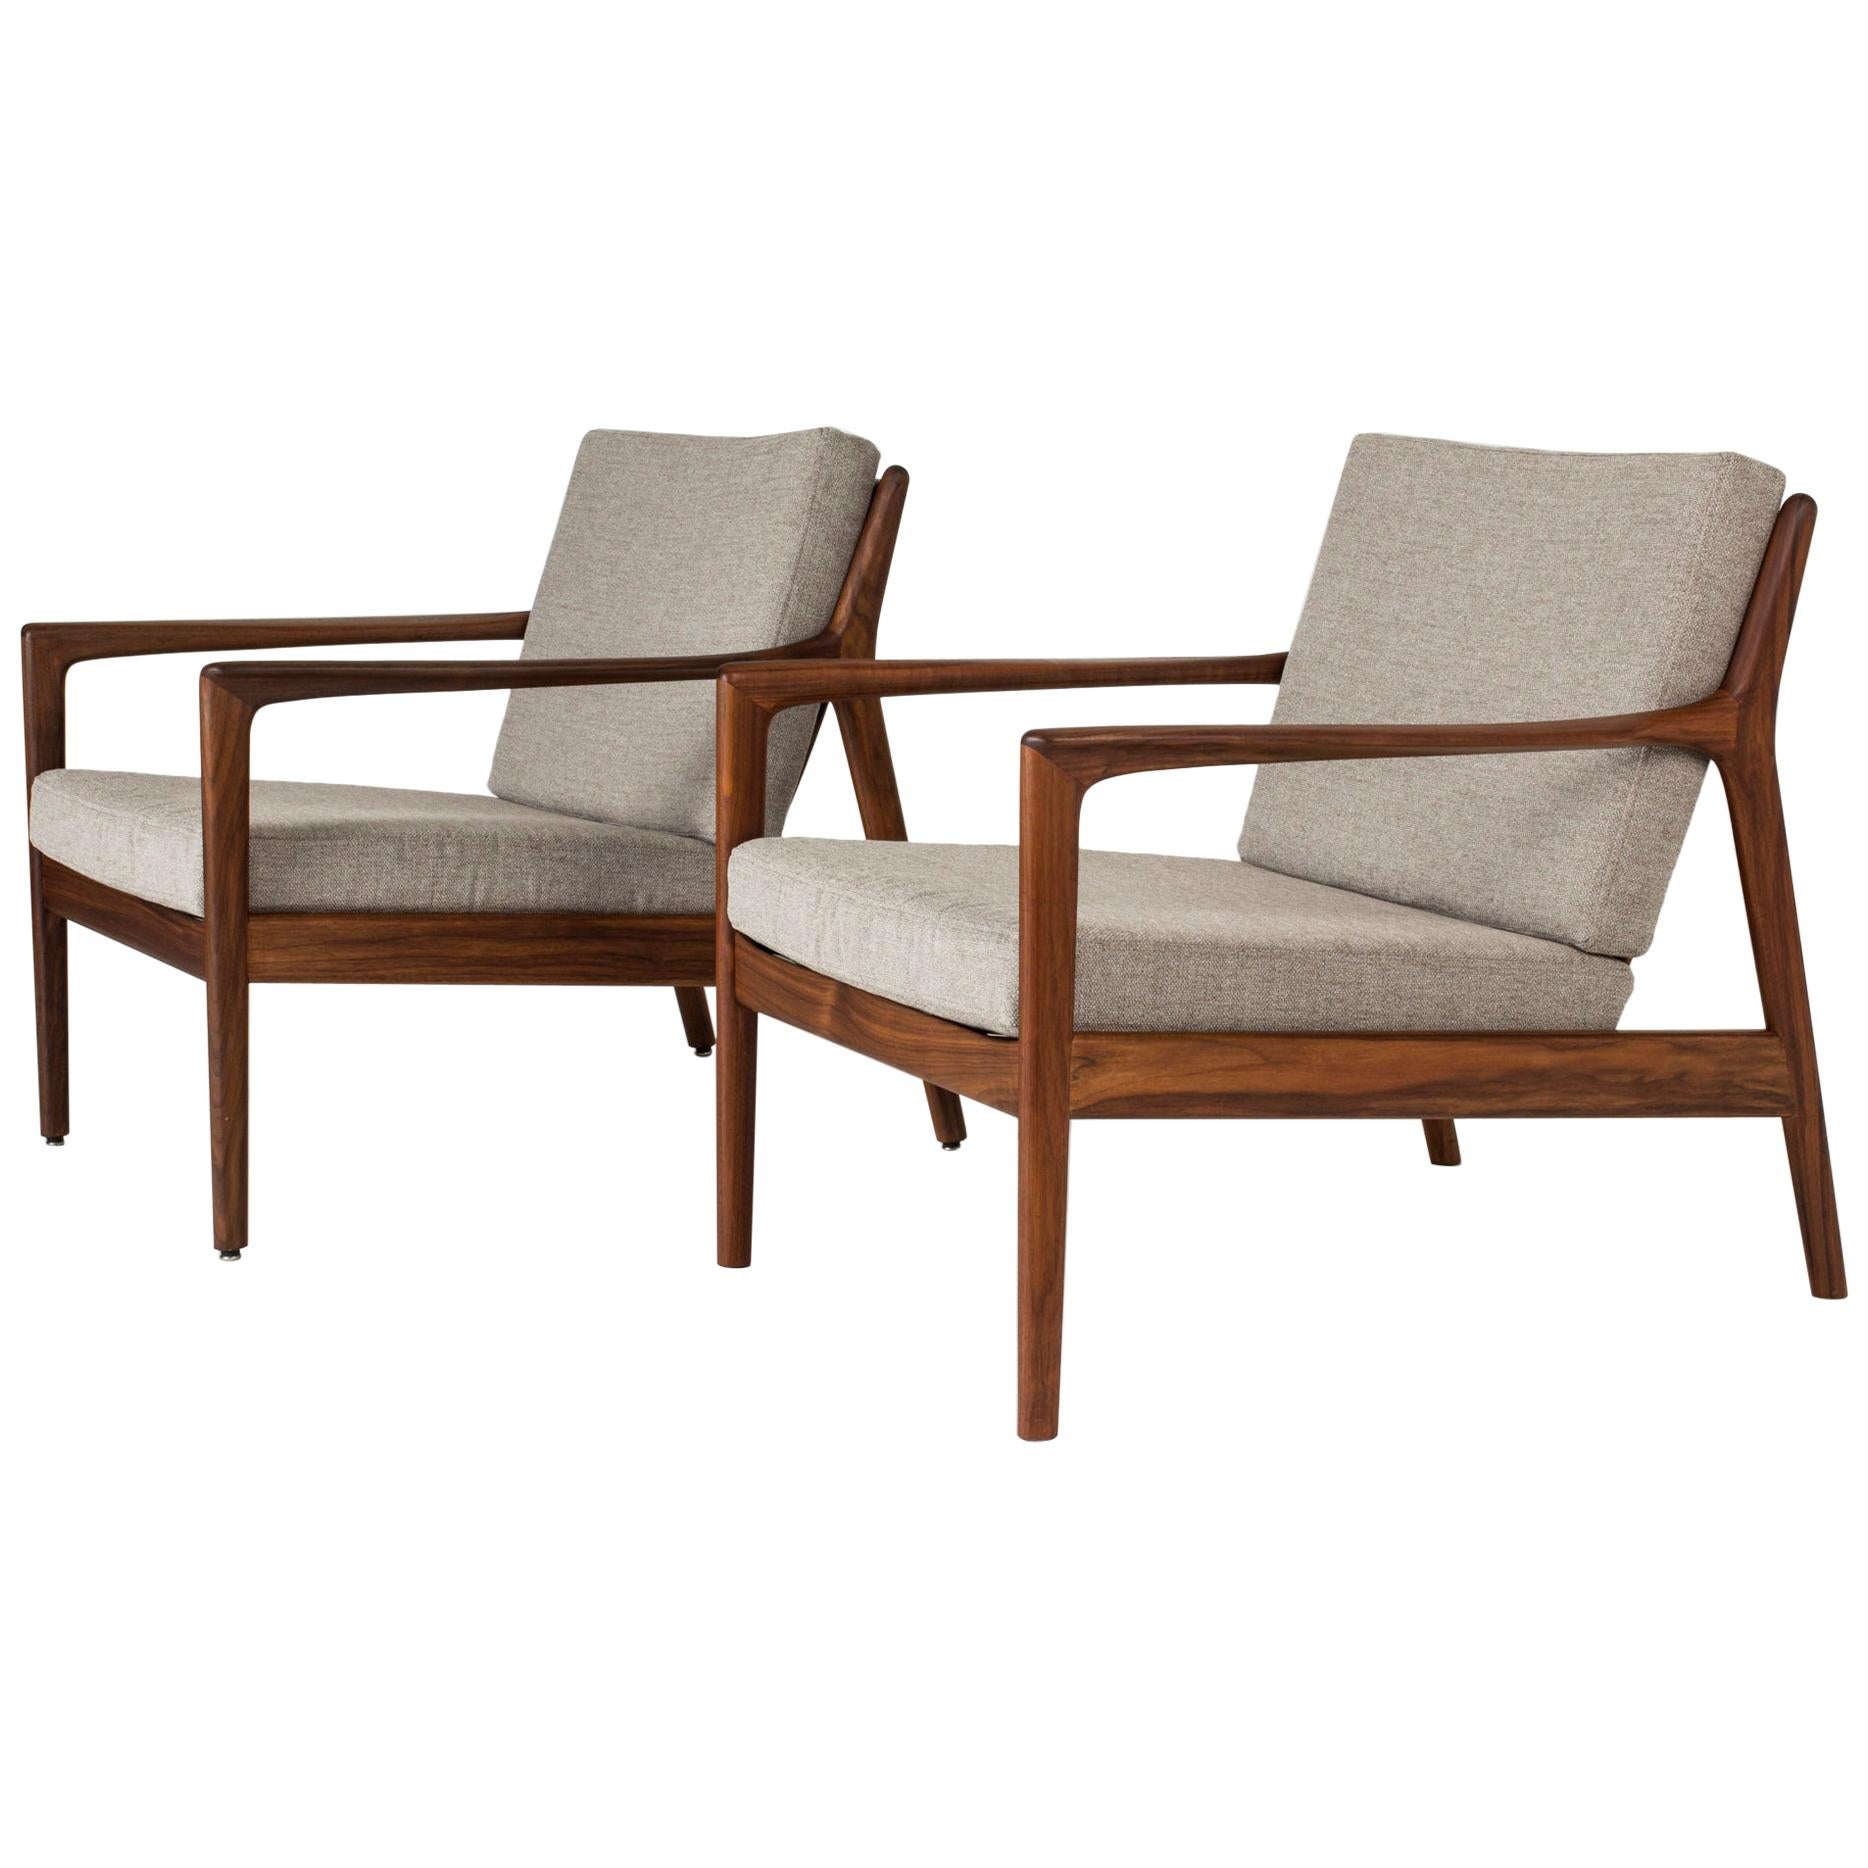 Pair of “USA 75” Teak Lounge Chairs by Folke Ohlsson for DUX, Sweden, 1960s